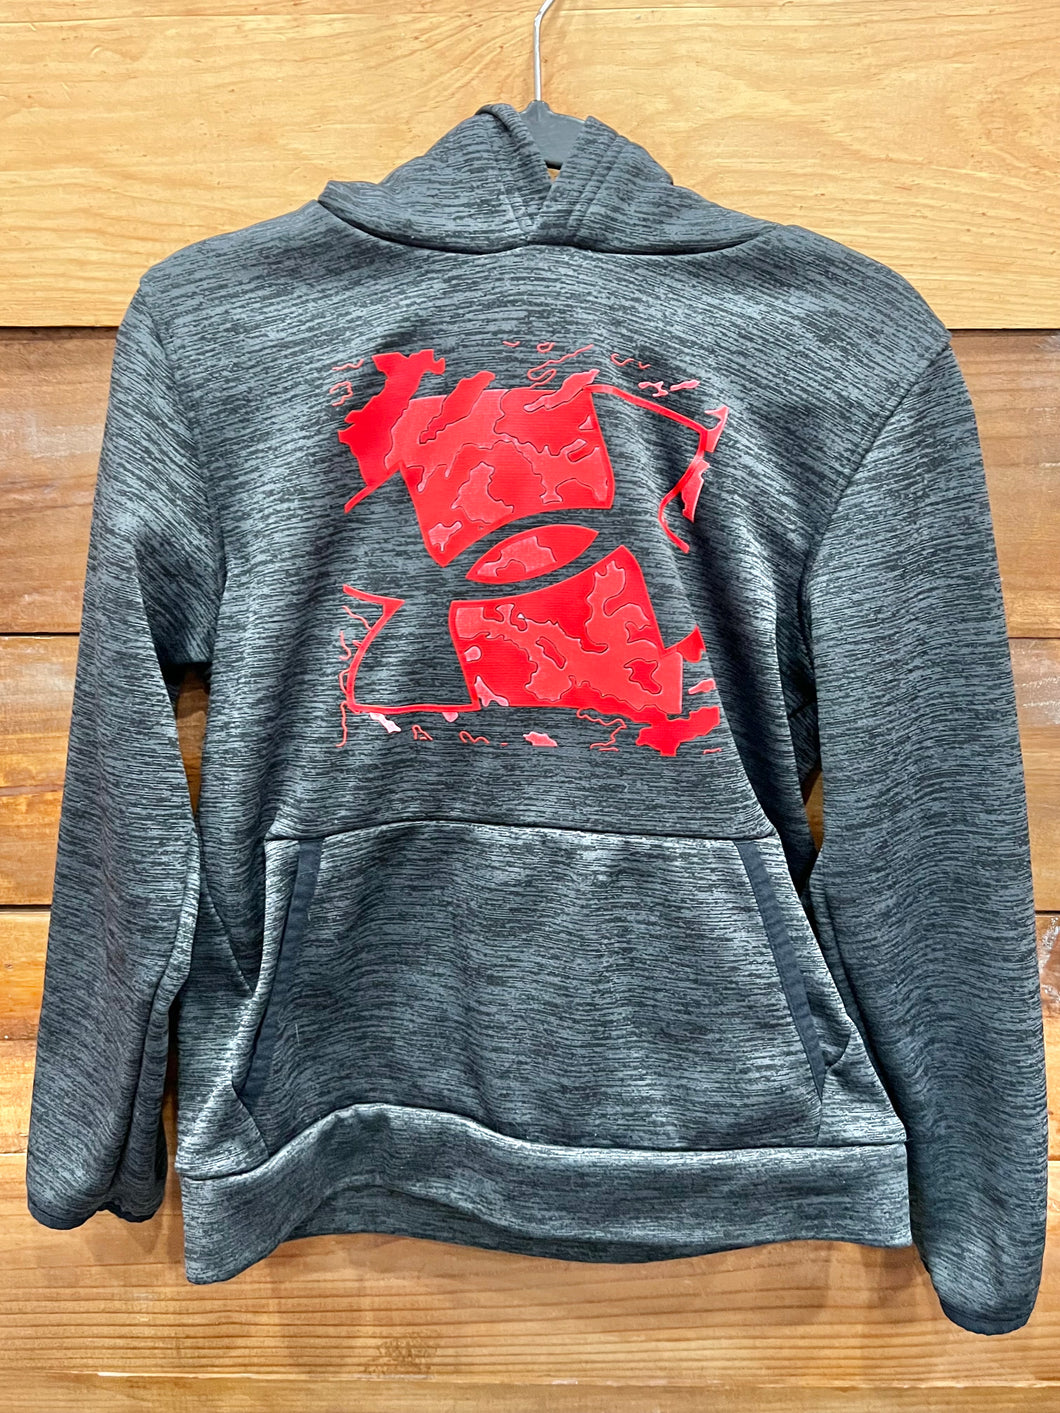 Under Armour Gray & Red Hoodie Size 8